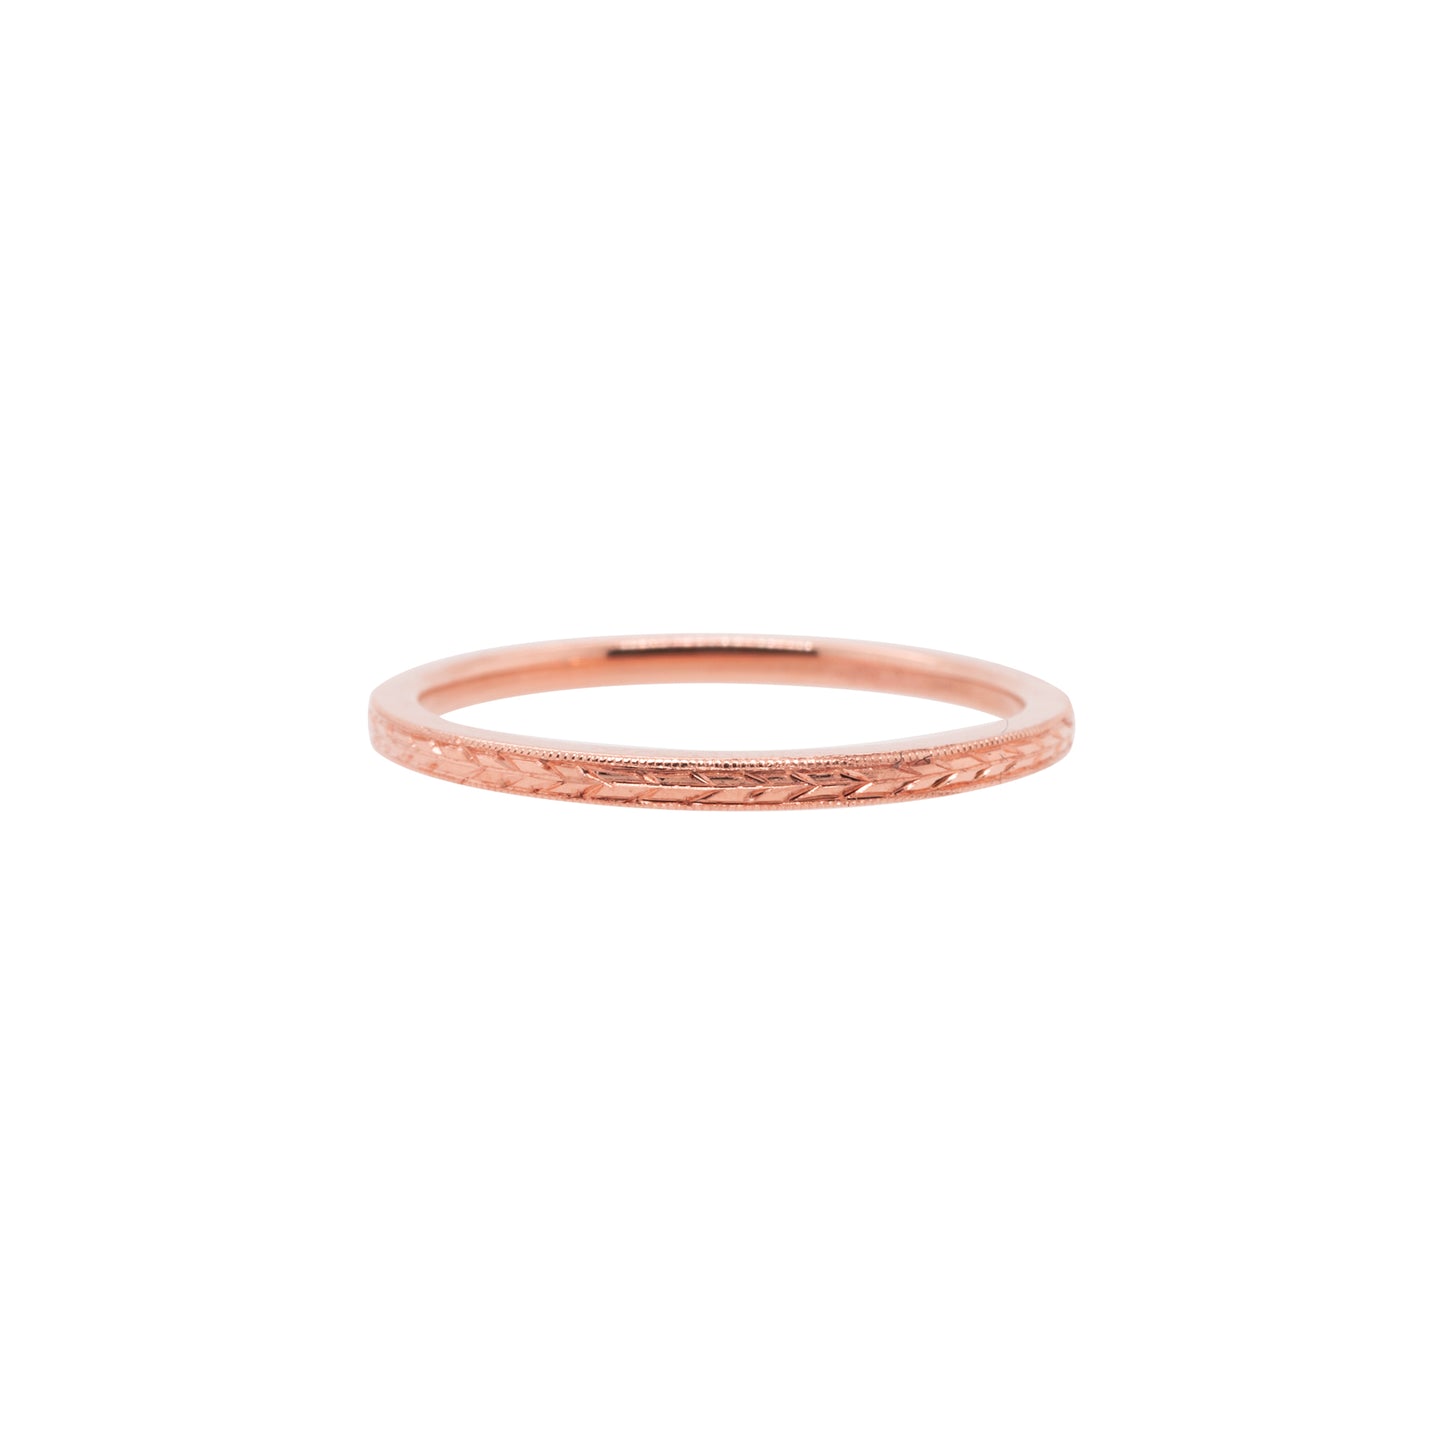 The Thin Wheat 1.5mm Hand Engraved Stackable Wedding Band